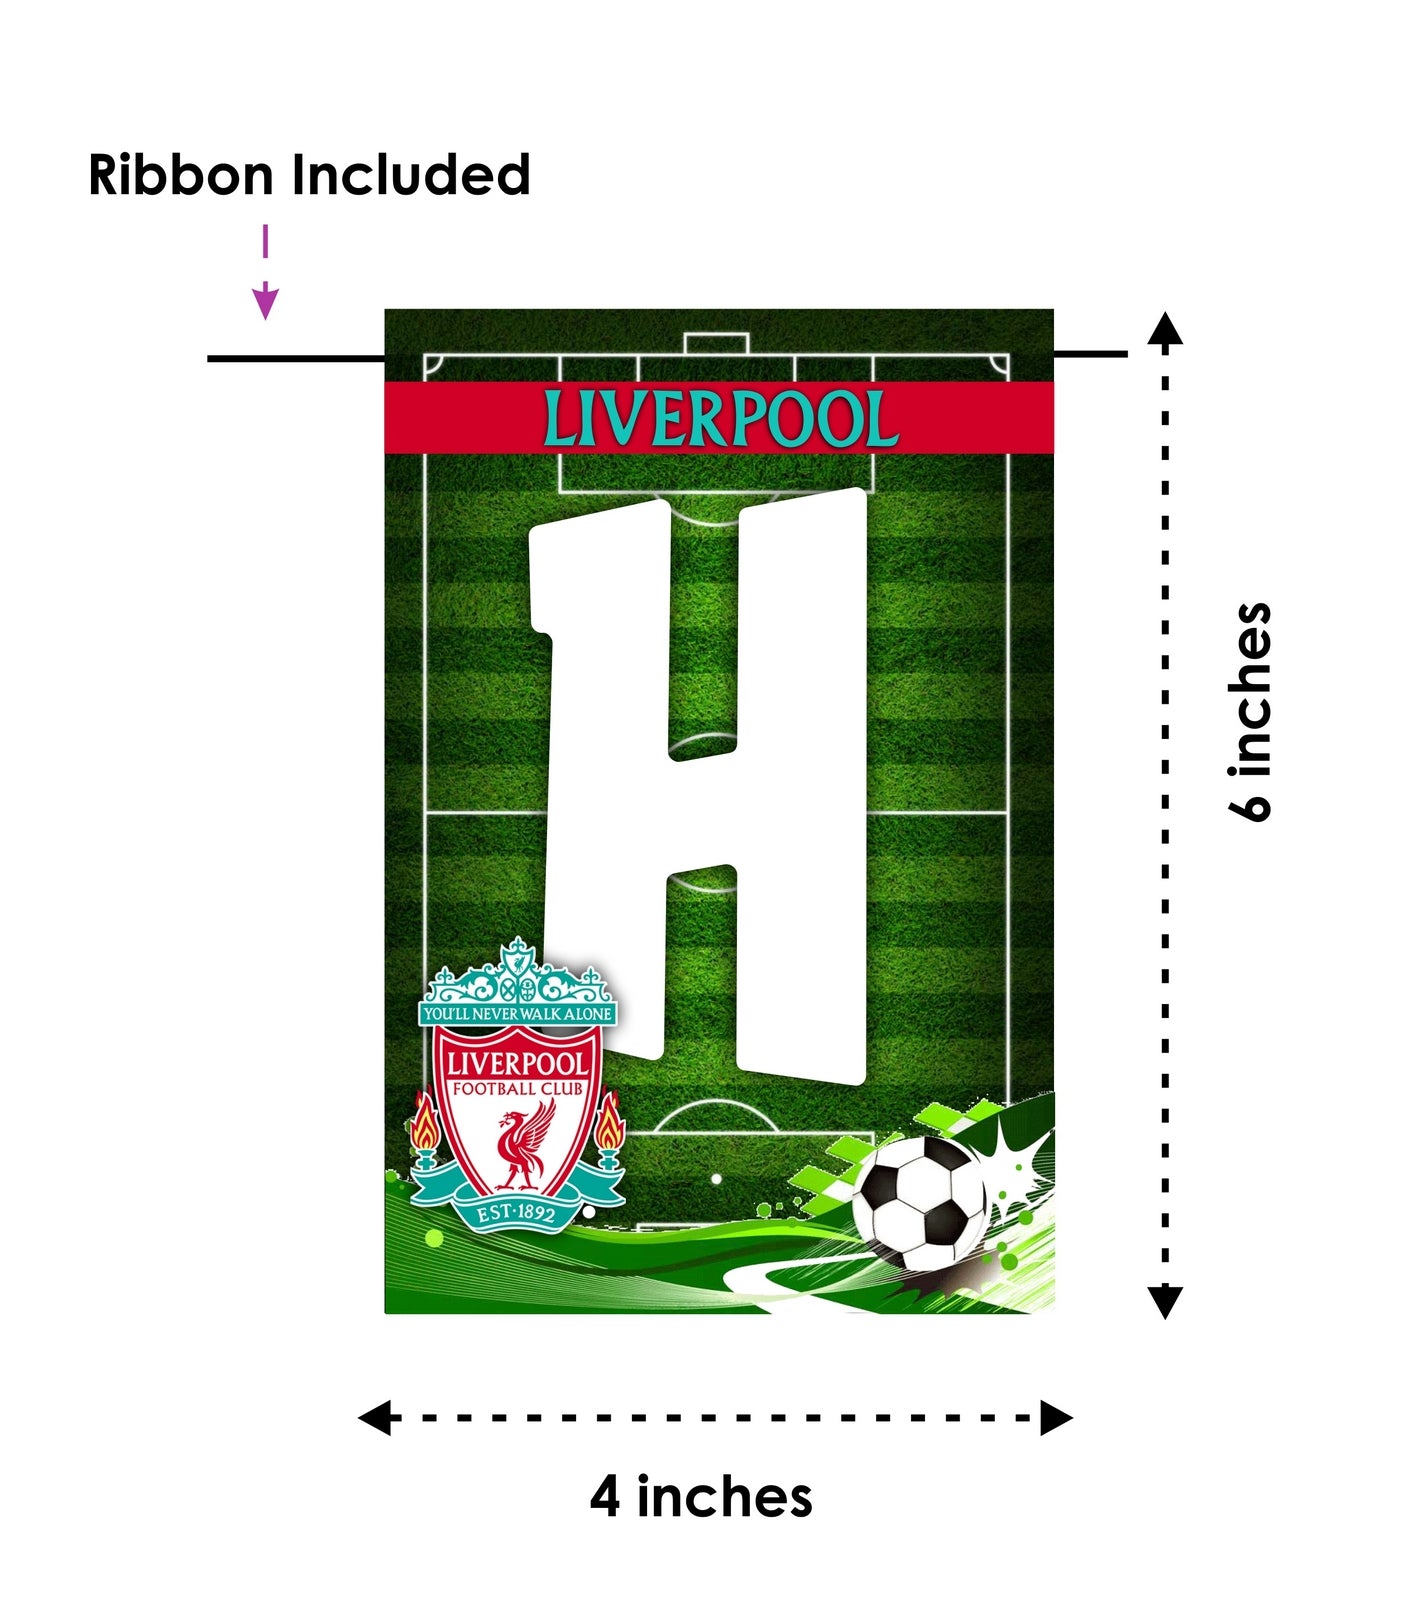 Liverpool Football Theme Happy Birthday Decoration Hanging and Banner for Photo Shoot Backdrop and Theme Party